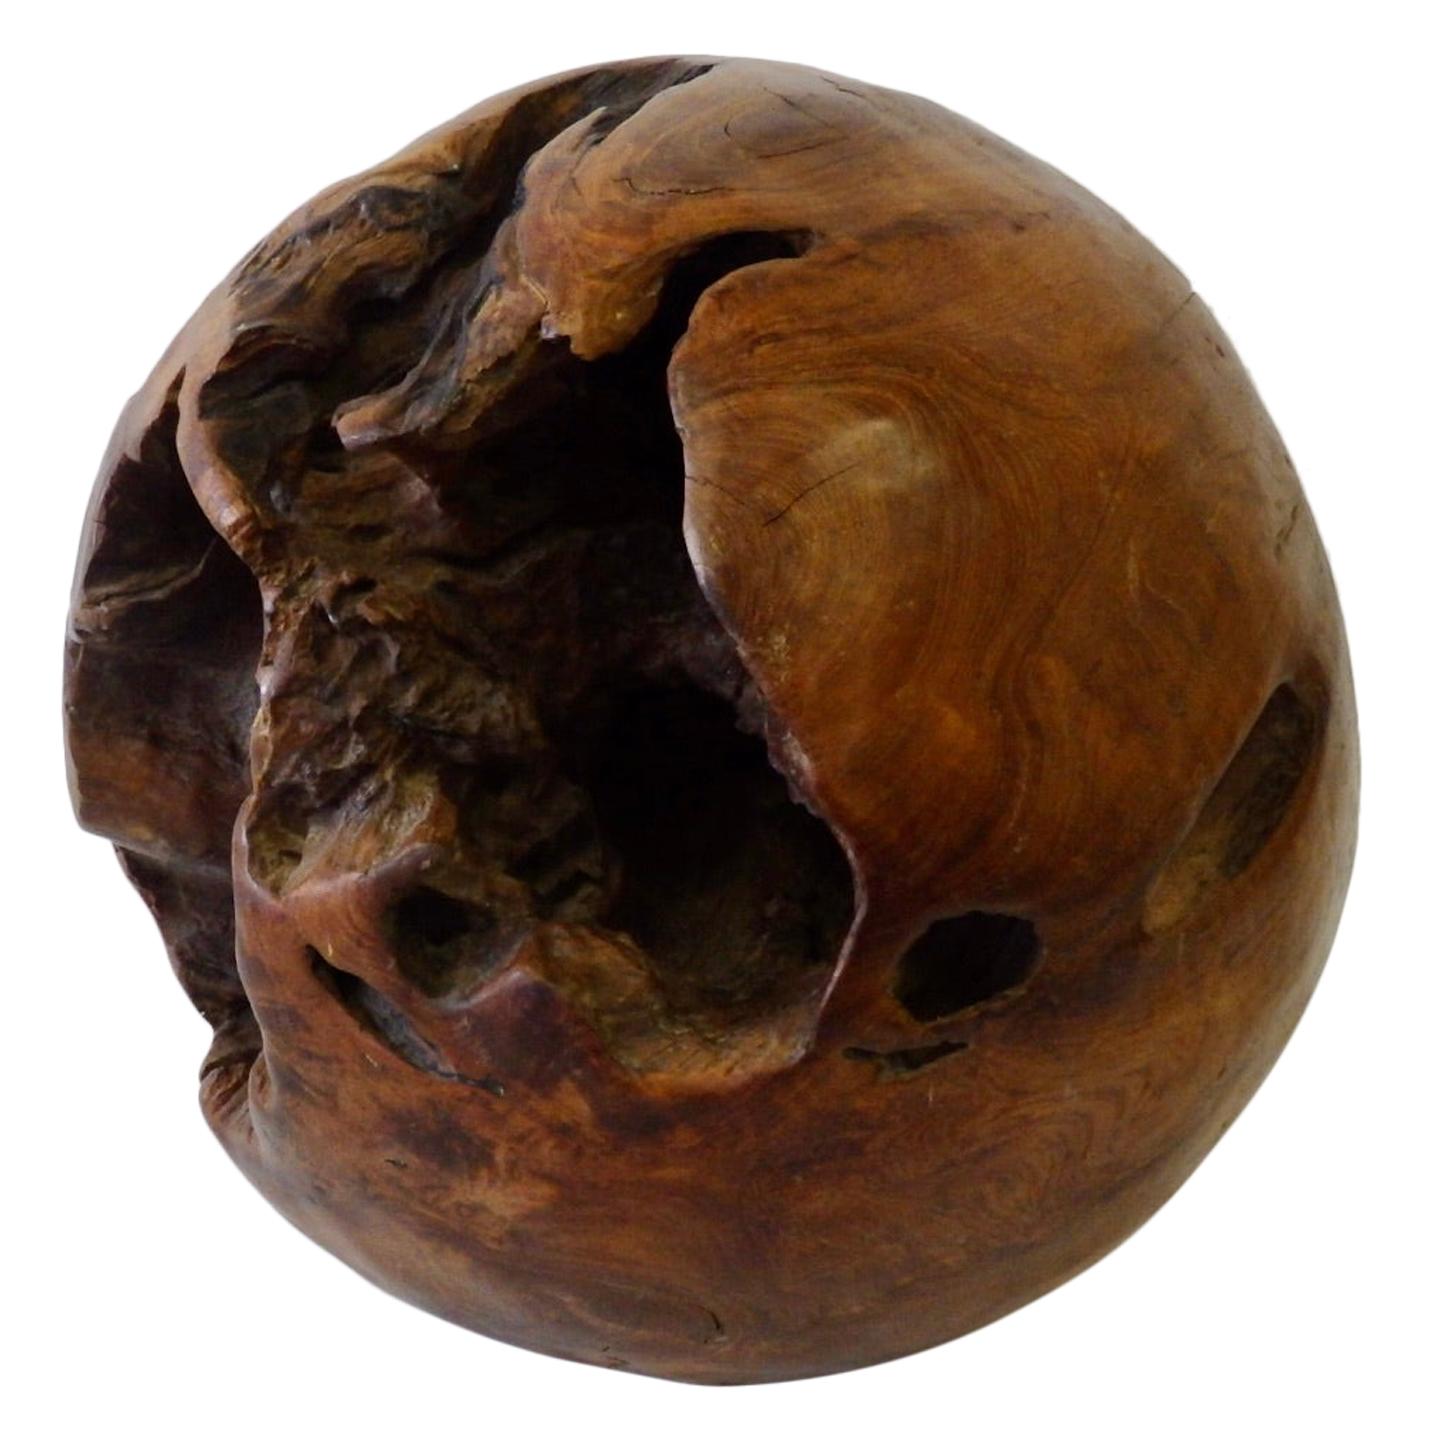 Giant Organic and Natural Wood Burl Ball For Sale